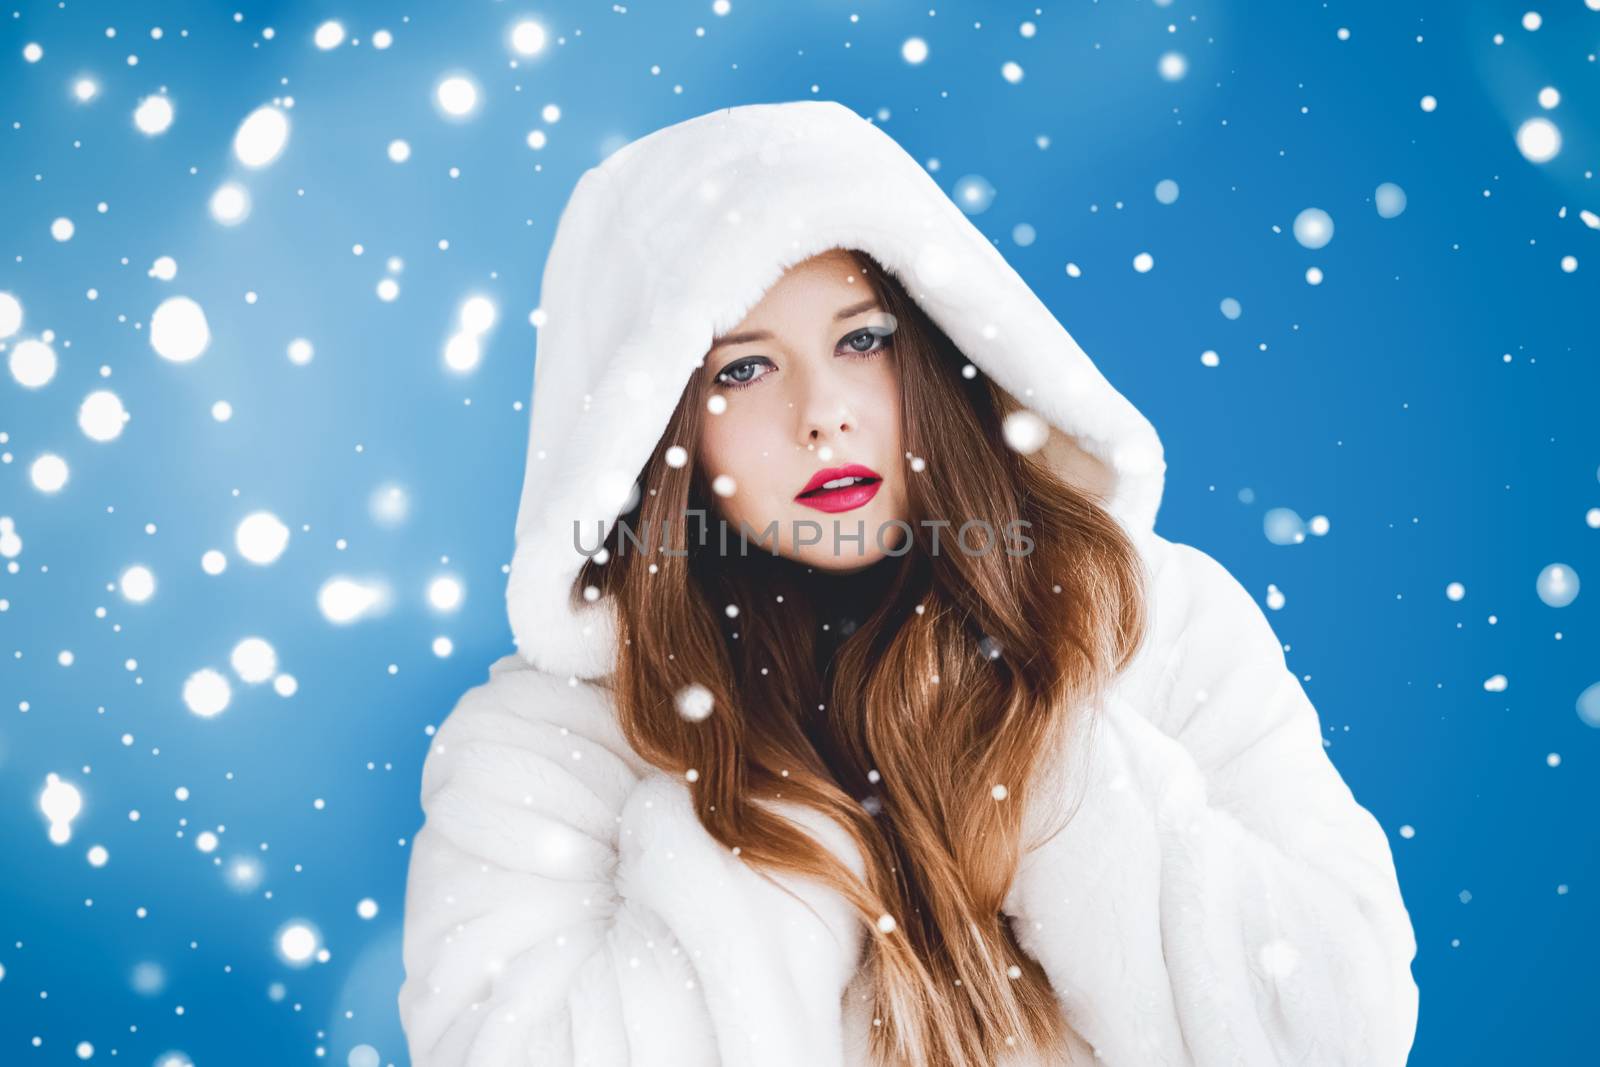 Happy Christmas and winter holiday portrait of young woman in white hooded fur coat, snow on blue background, fashion and lifestyle campaign